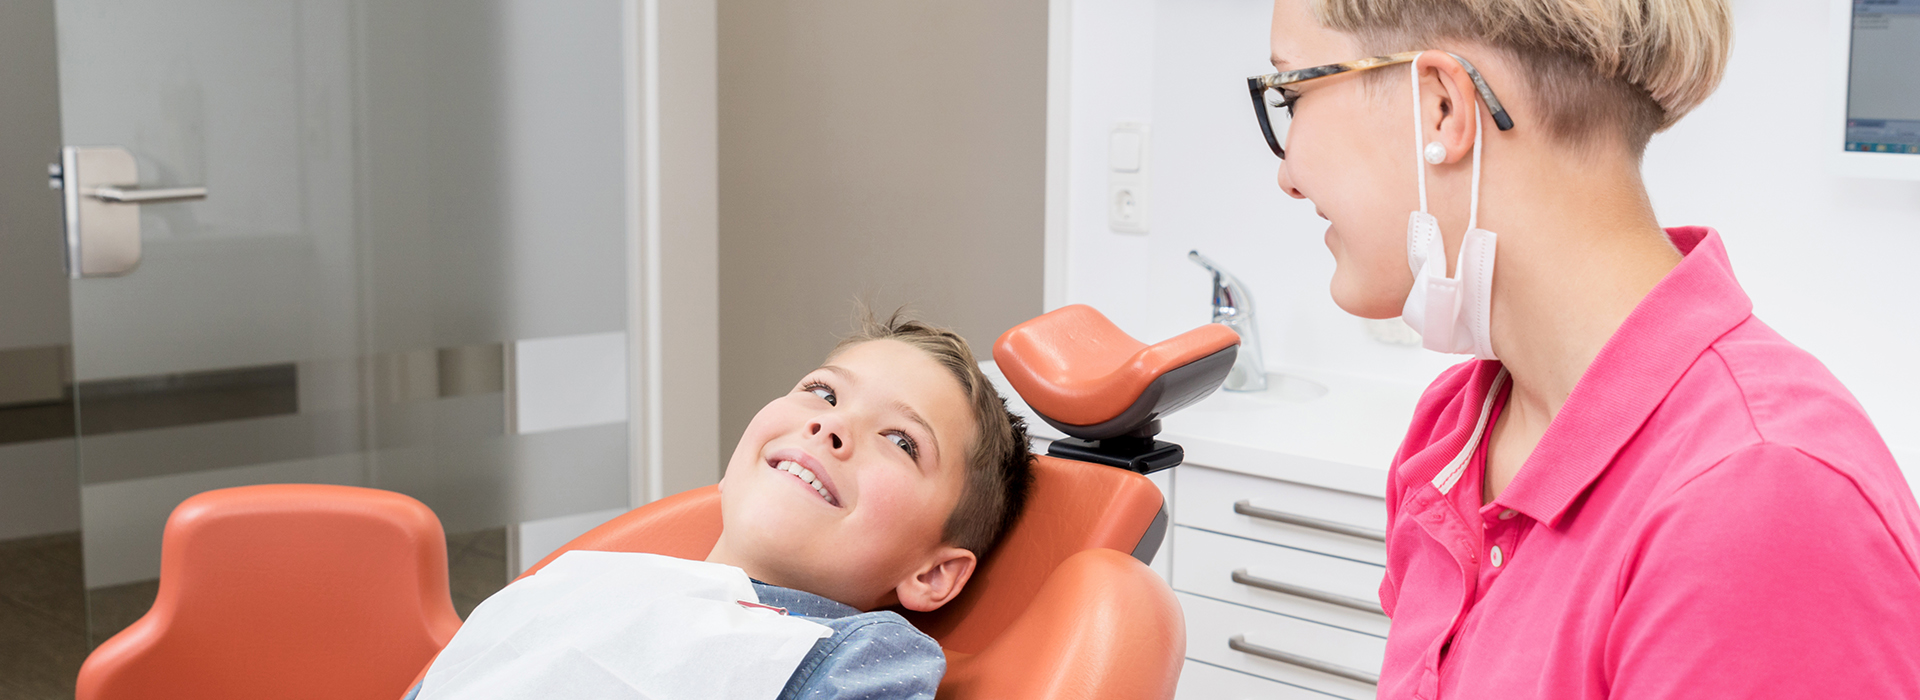 Kennedy Dentistry | Fluoride Treatment, Implant Dentistry and Sports Mouthguards